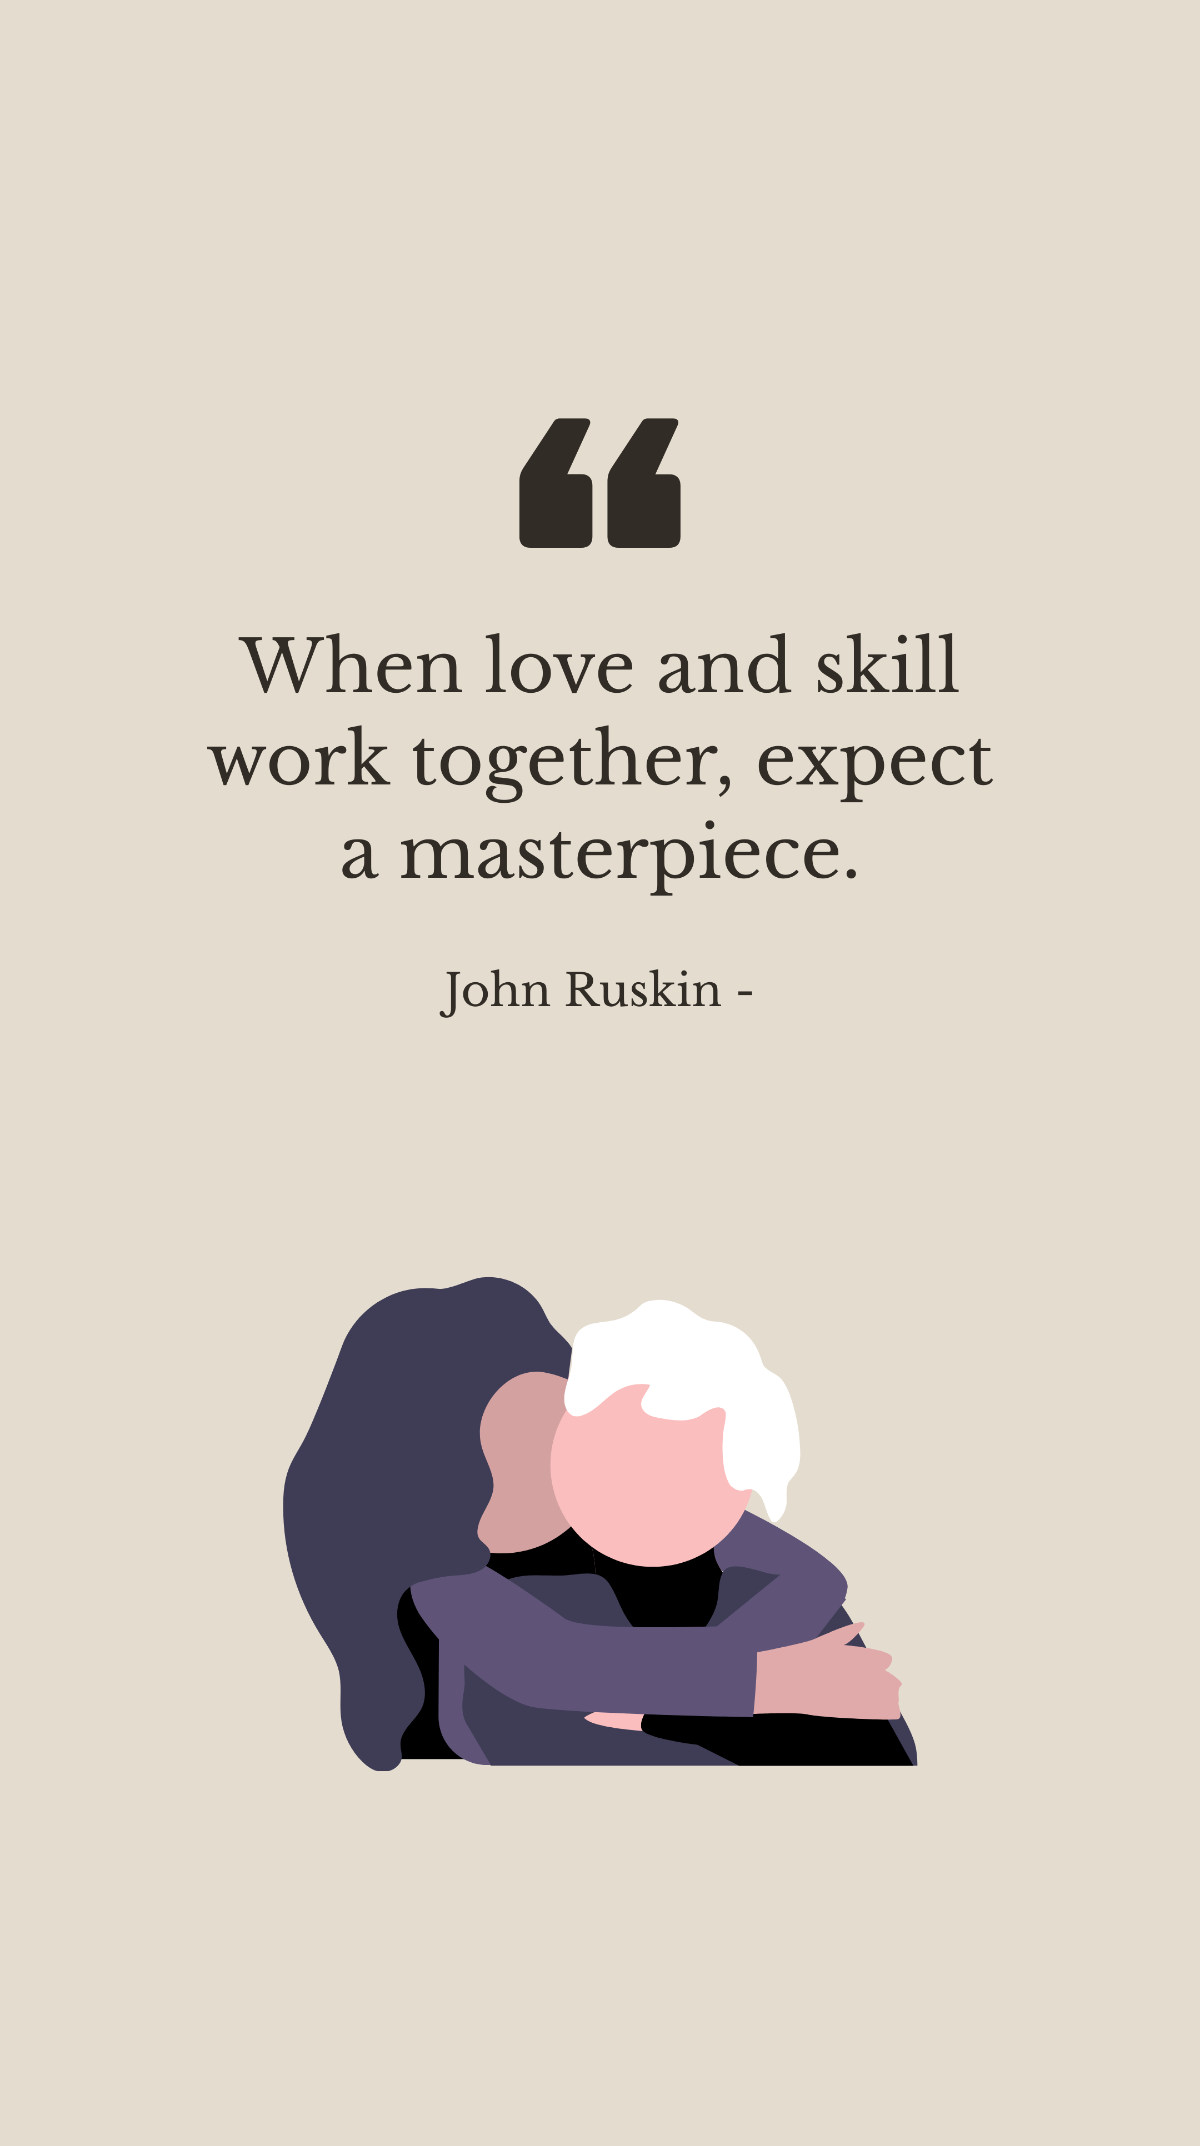 John Ruskin - When love and skill work together, expect a masterpiece. Template